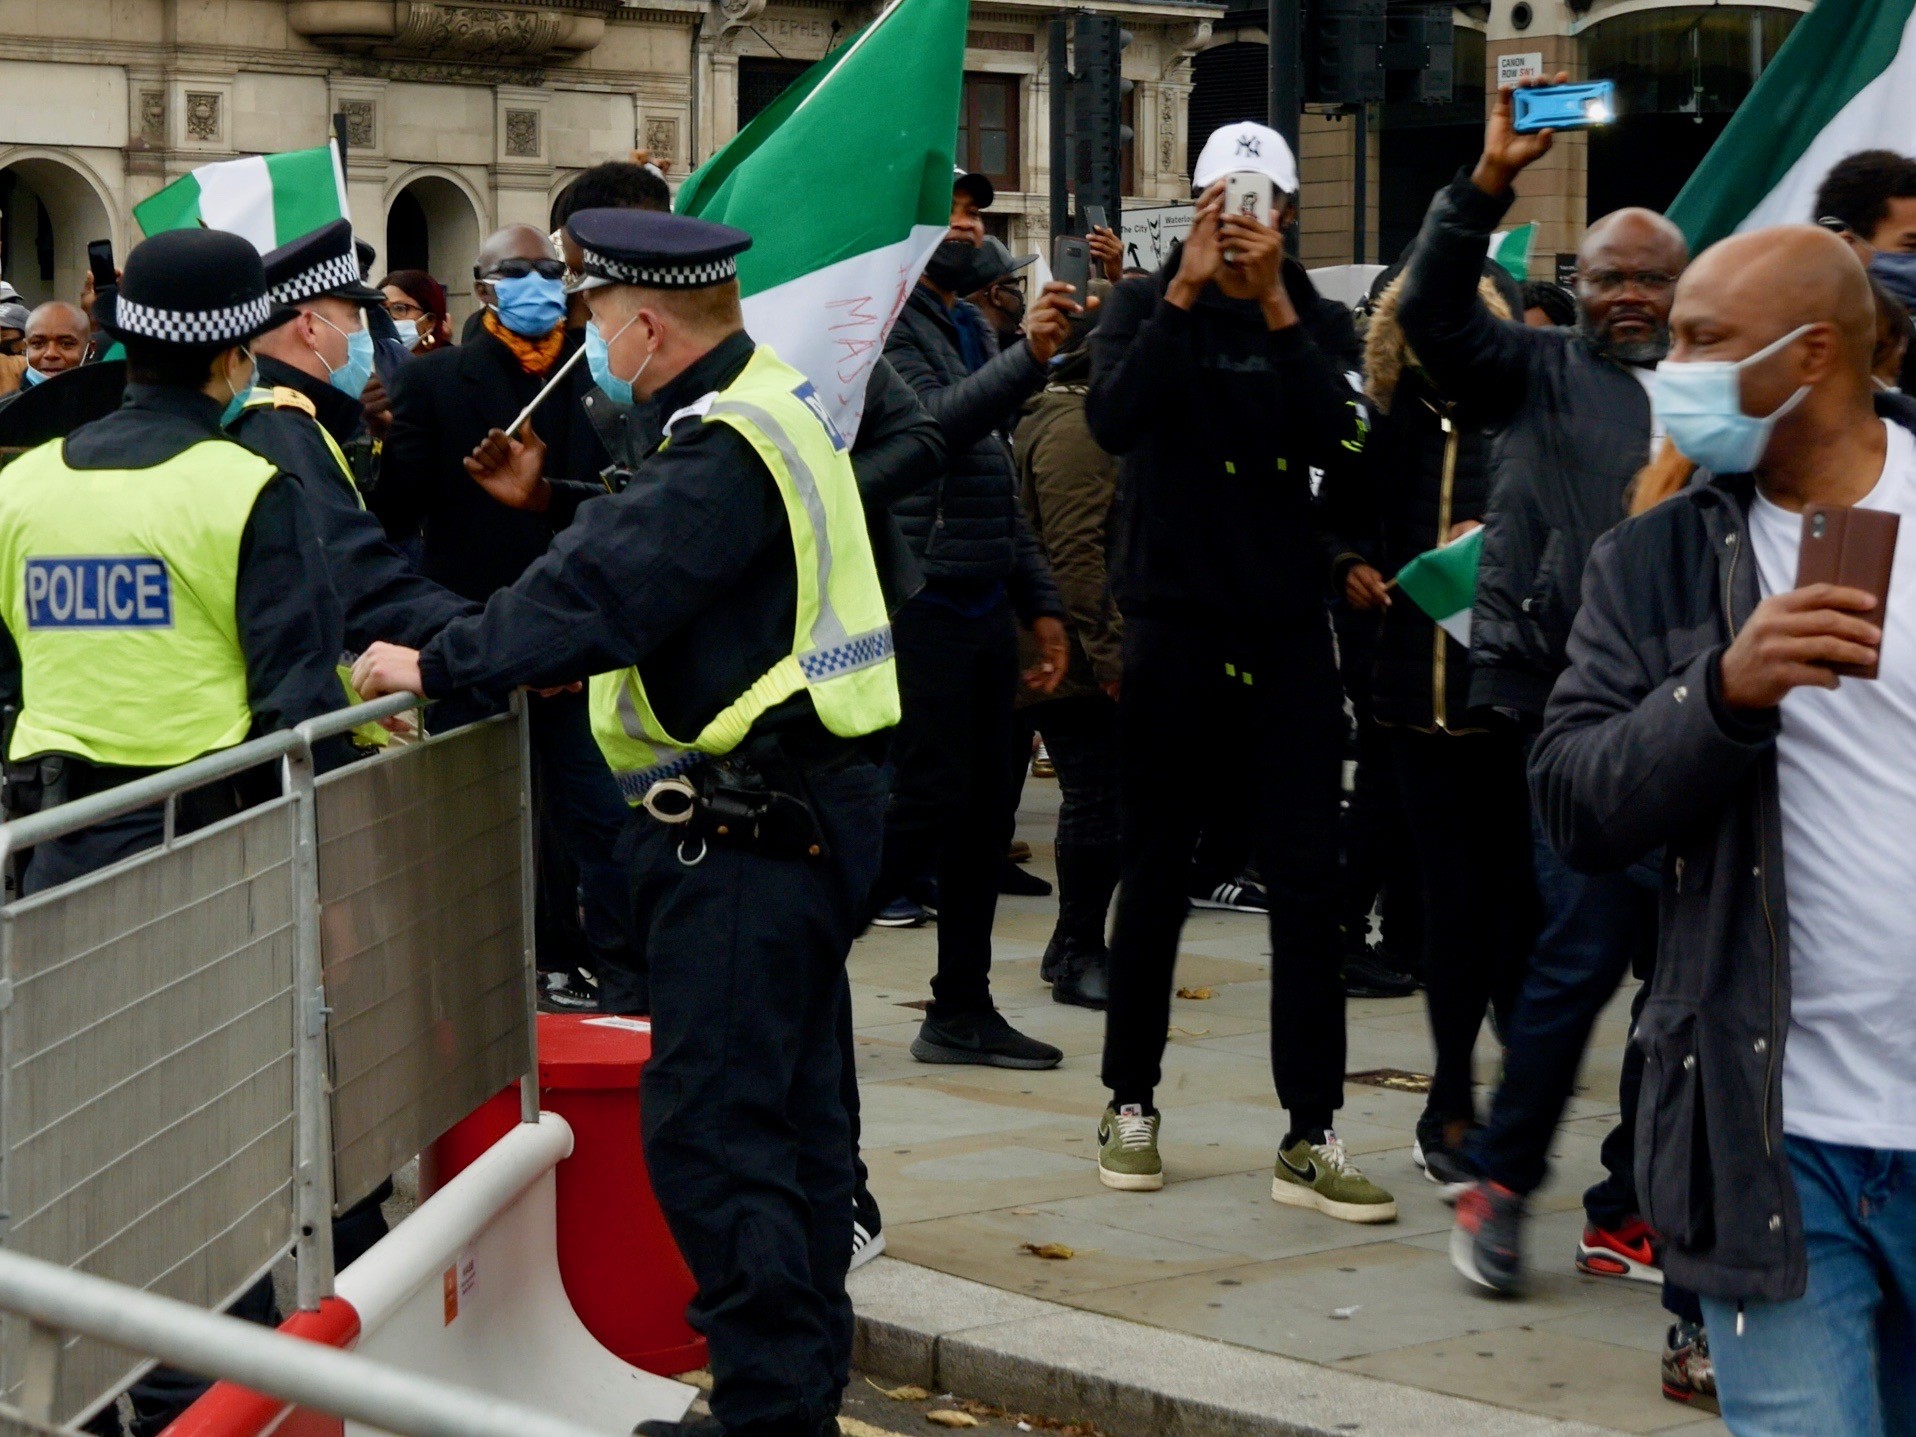 Hundreds of protesters against police brutality in Nigeria took to the streets of London on October 24, 2020. Kurt Zindulka, Breitbart News